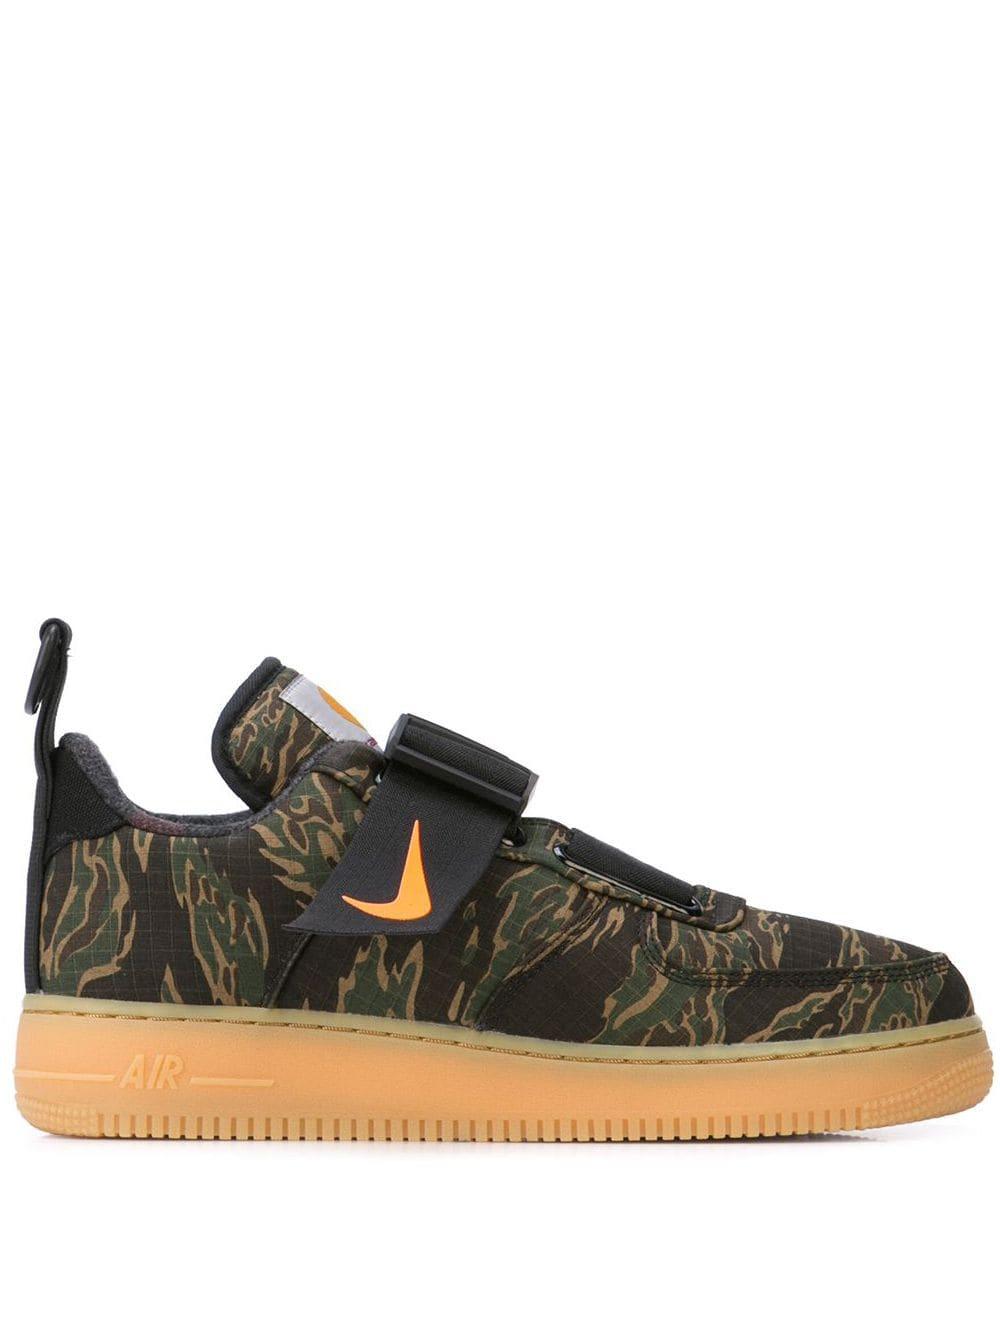 Nike Rubber Air Force 1 Utility Sneakers in Green for Men - Lyst